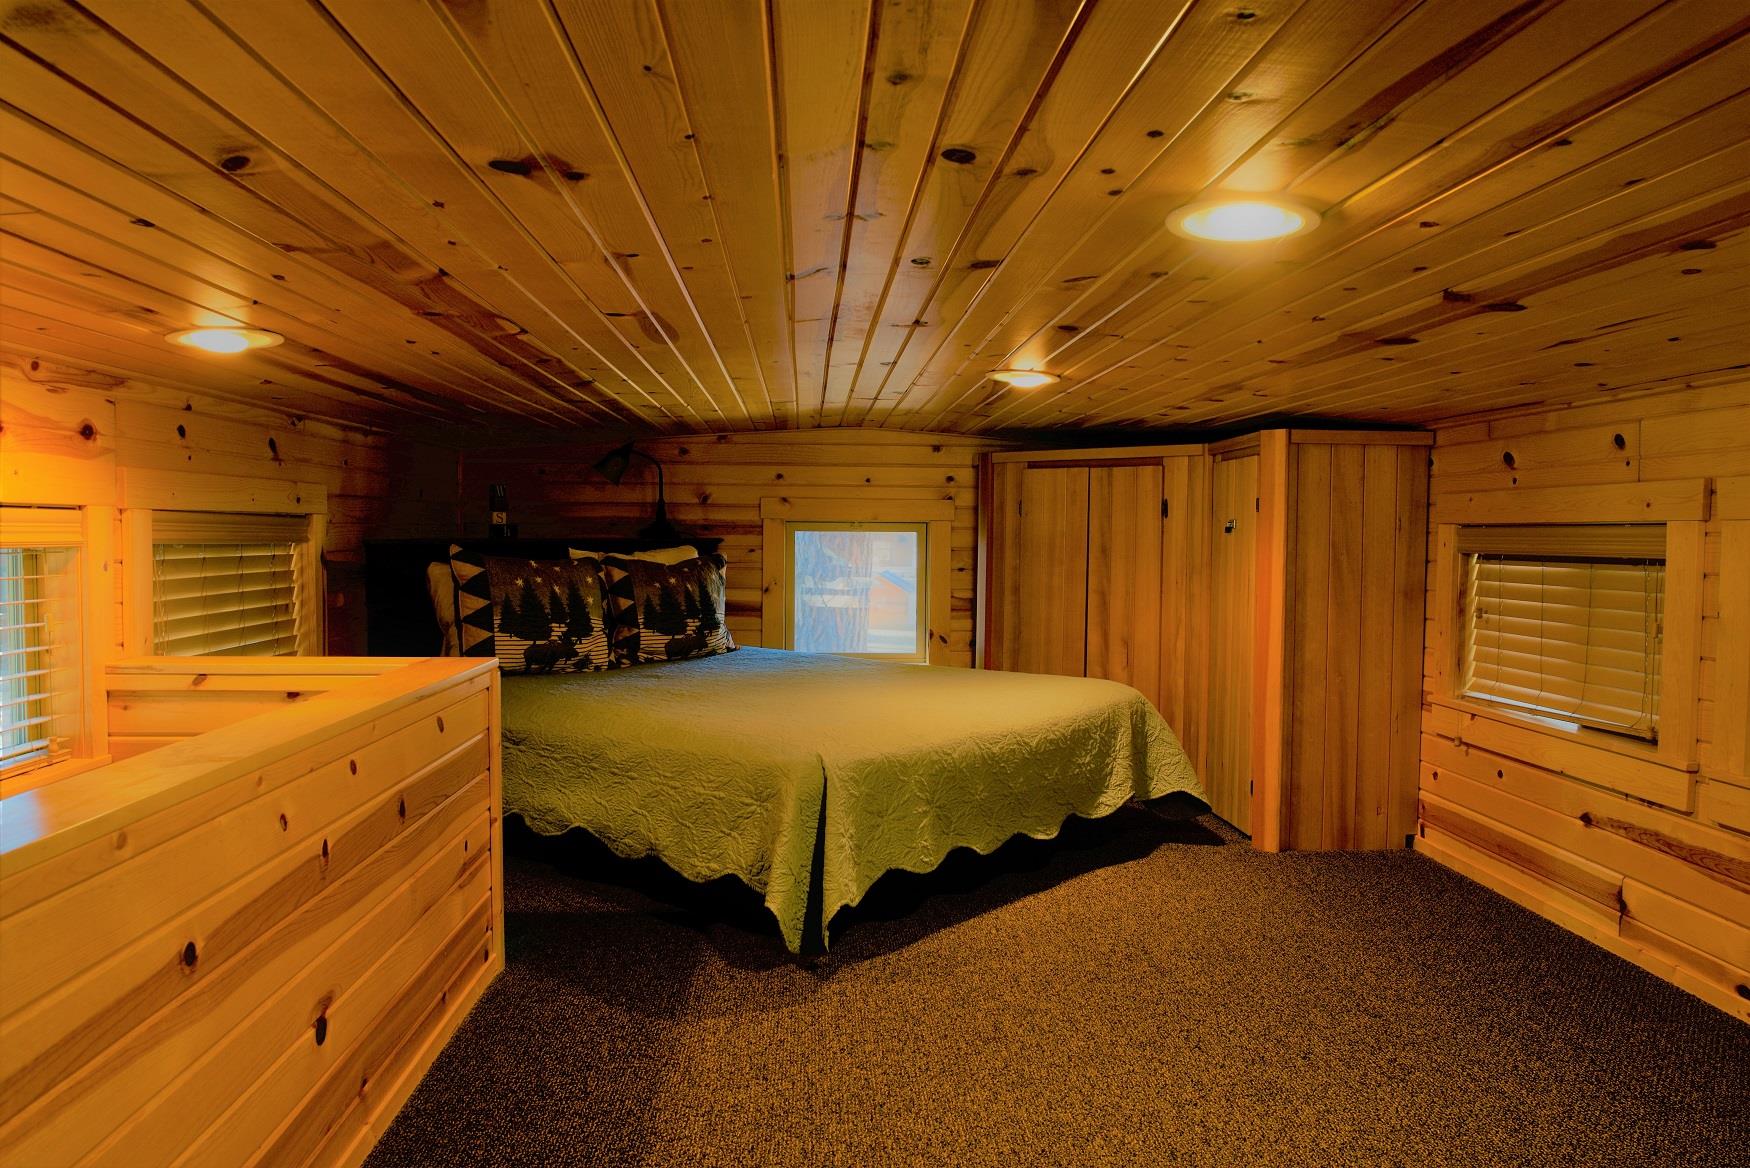 Get your best night sleep in the cozy queen bed in the loft of Ponderosa Cabin at Cold Springs Resort & RV Park in Camp Sherman, Oregon